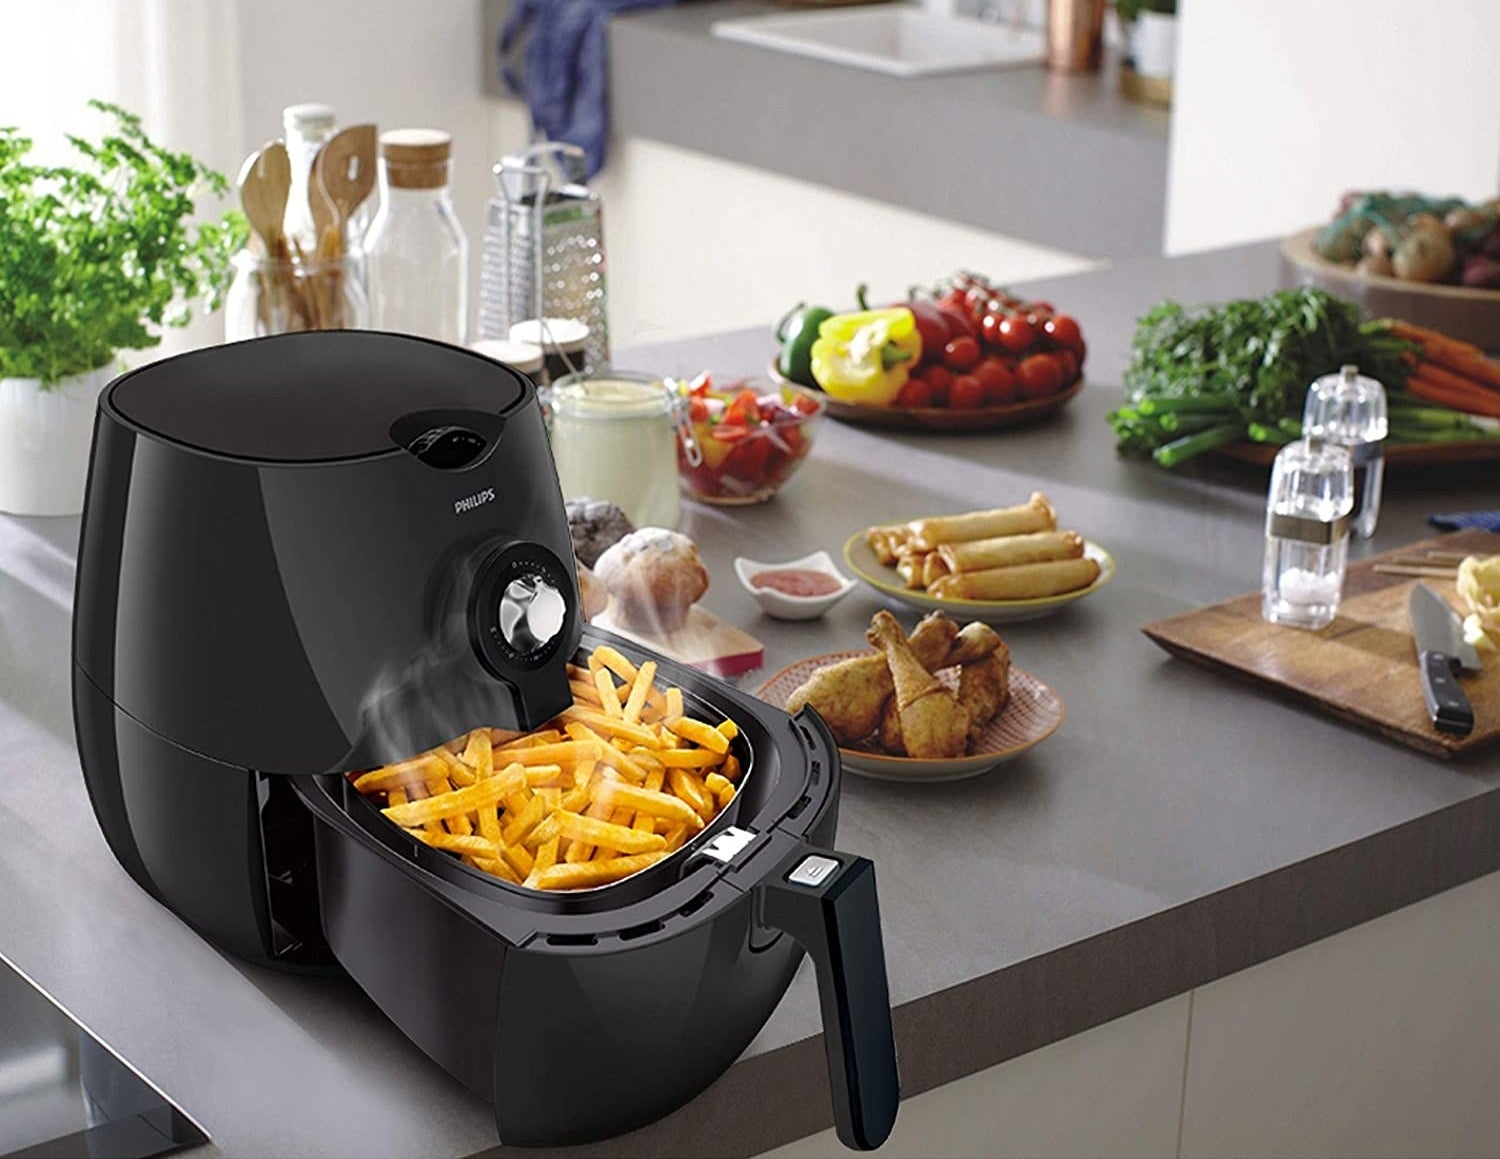 French fries being cooked in the air fryer. Other fried food items like fried chicken, spring rolls are kept next to it.